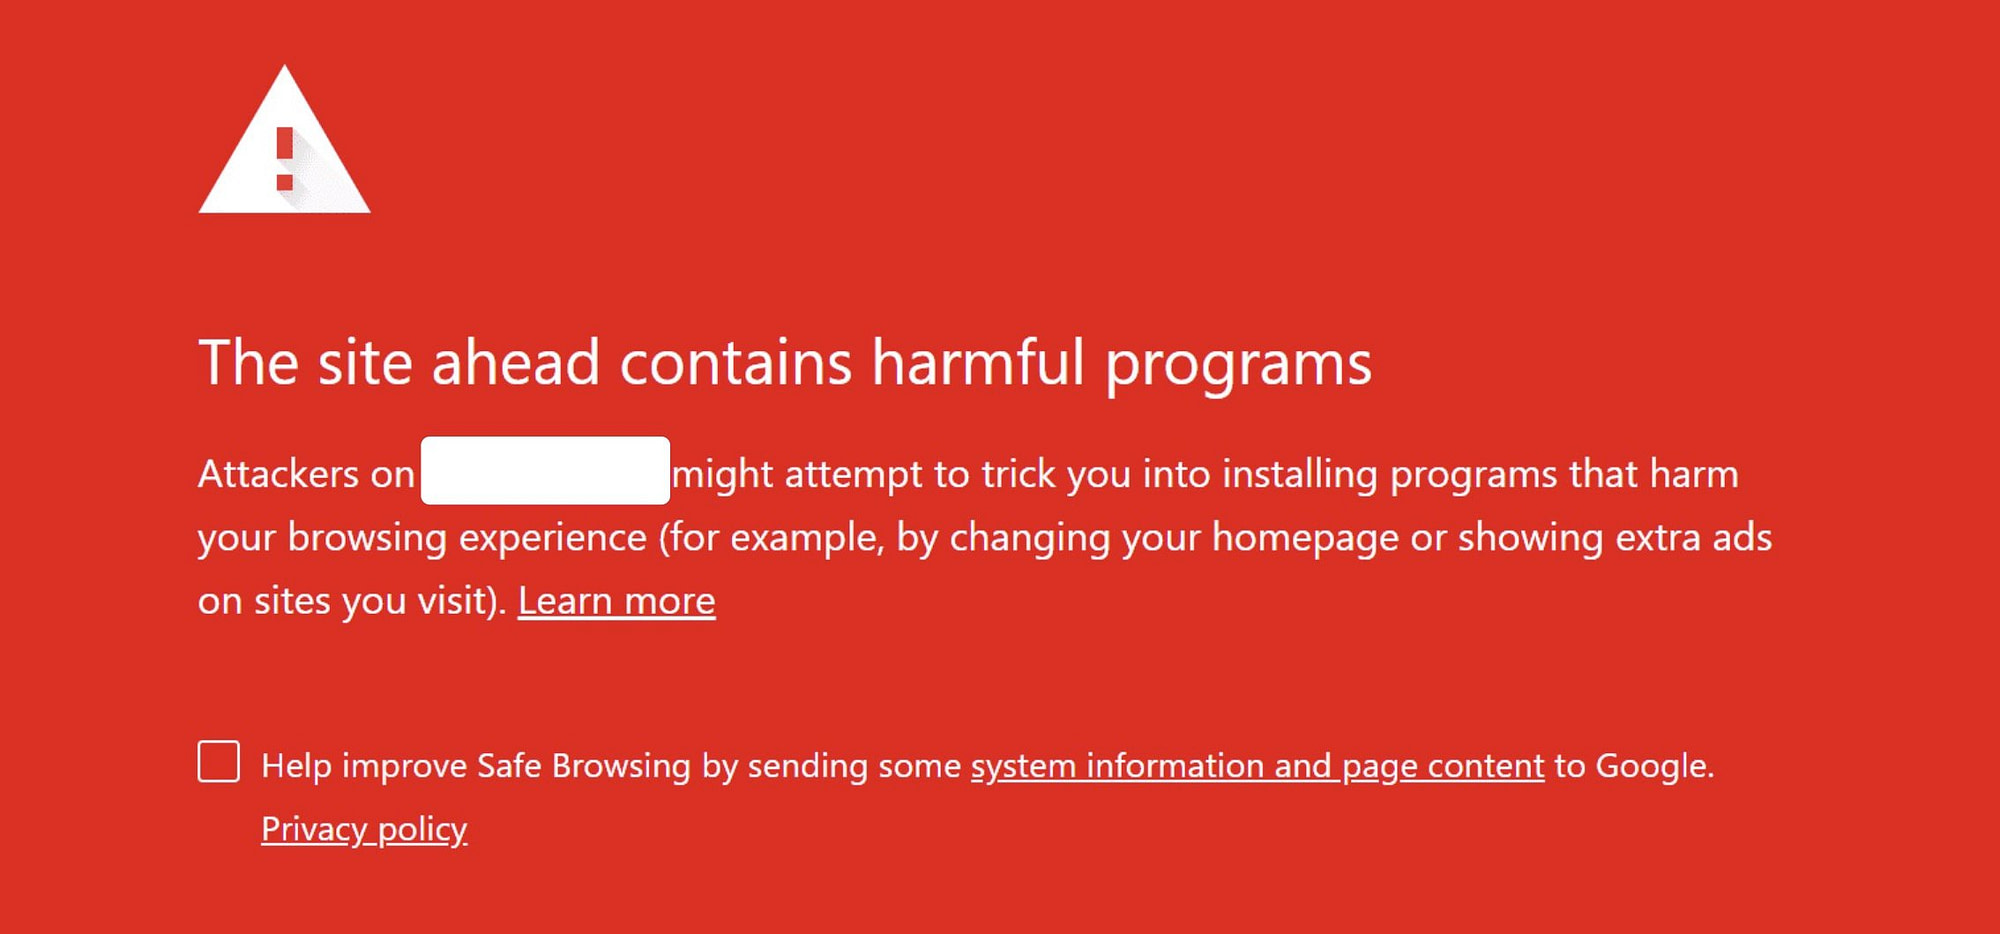 An example of the site ahead contains harmful programs error.